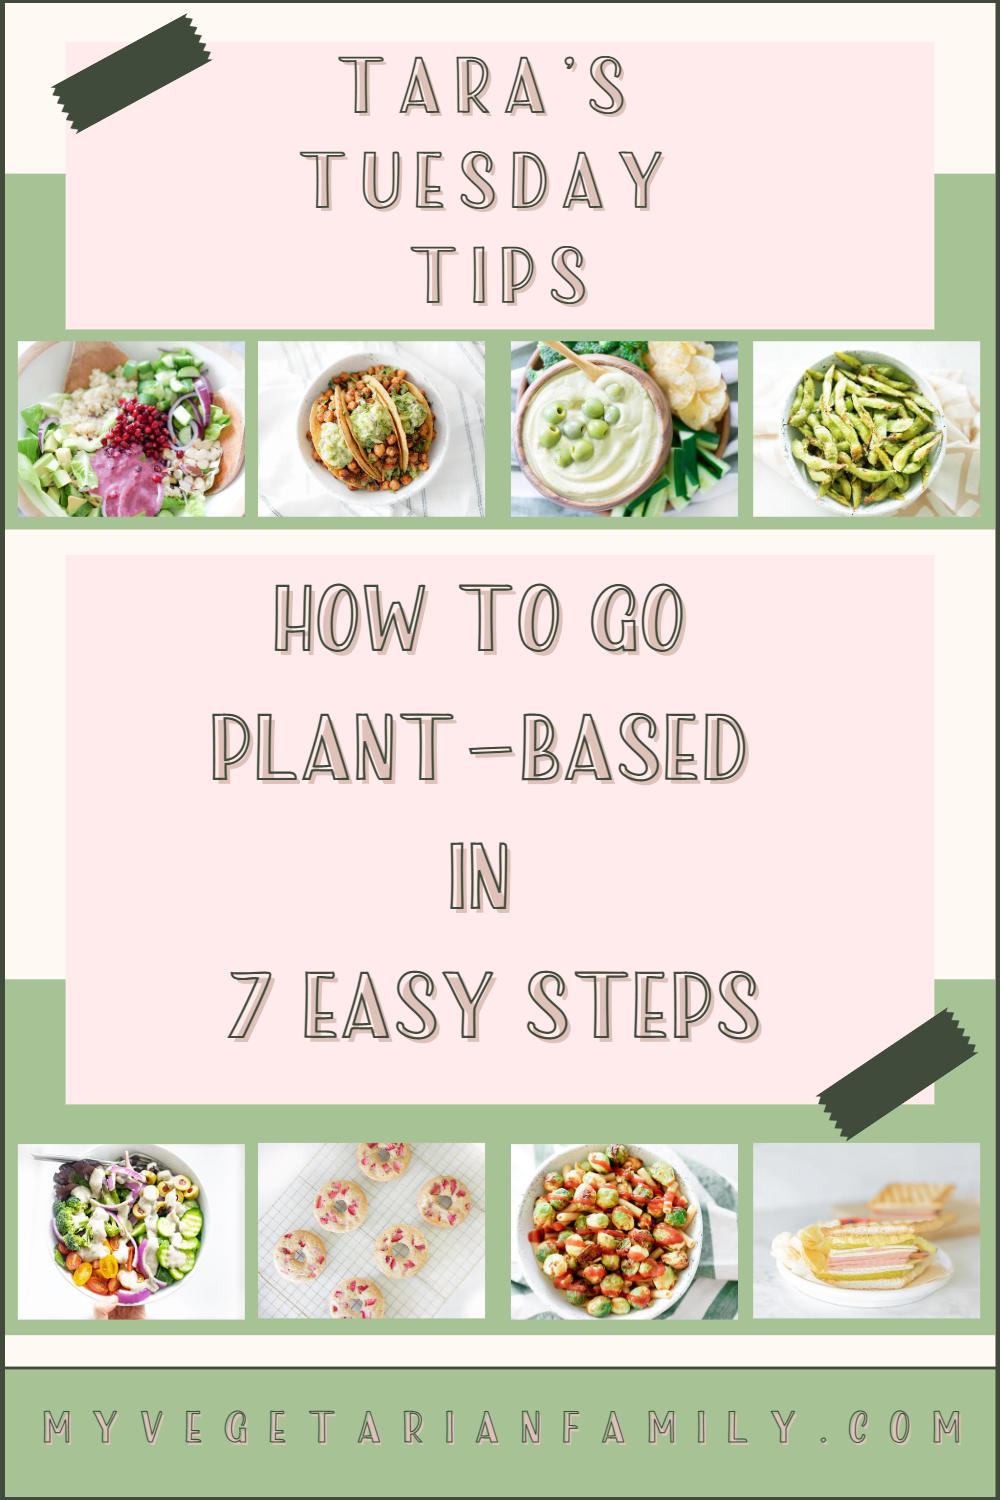 How To Go Plant-Based In 7 Easy Steps | Tara's Tuesday Tips | My Vegetarian Family #goingplantbased